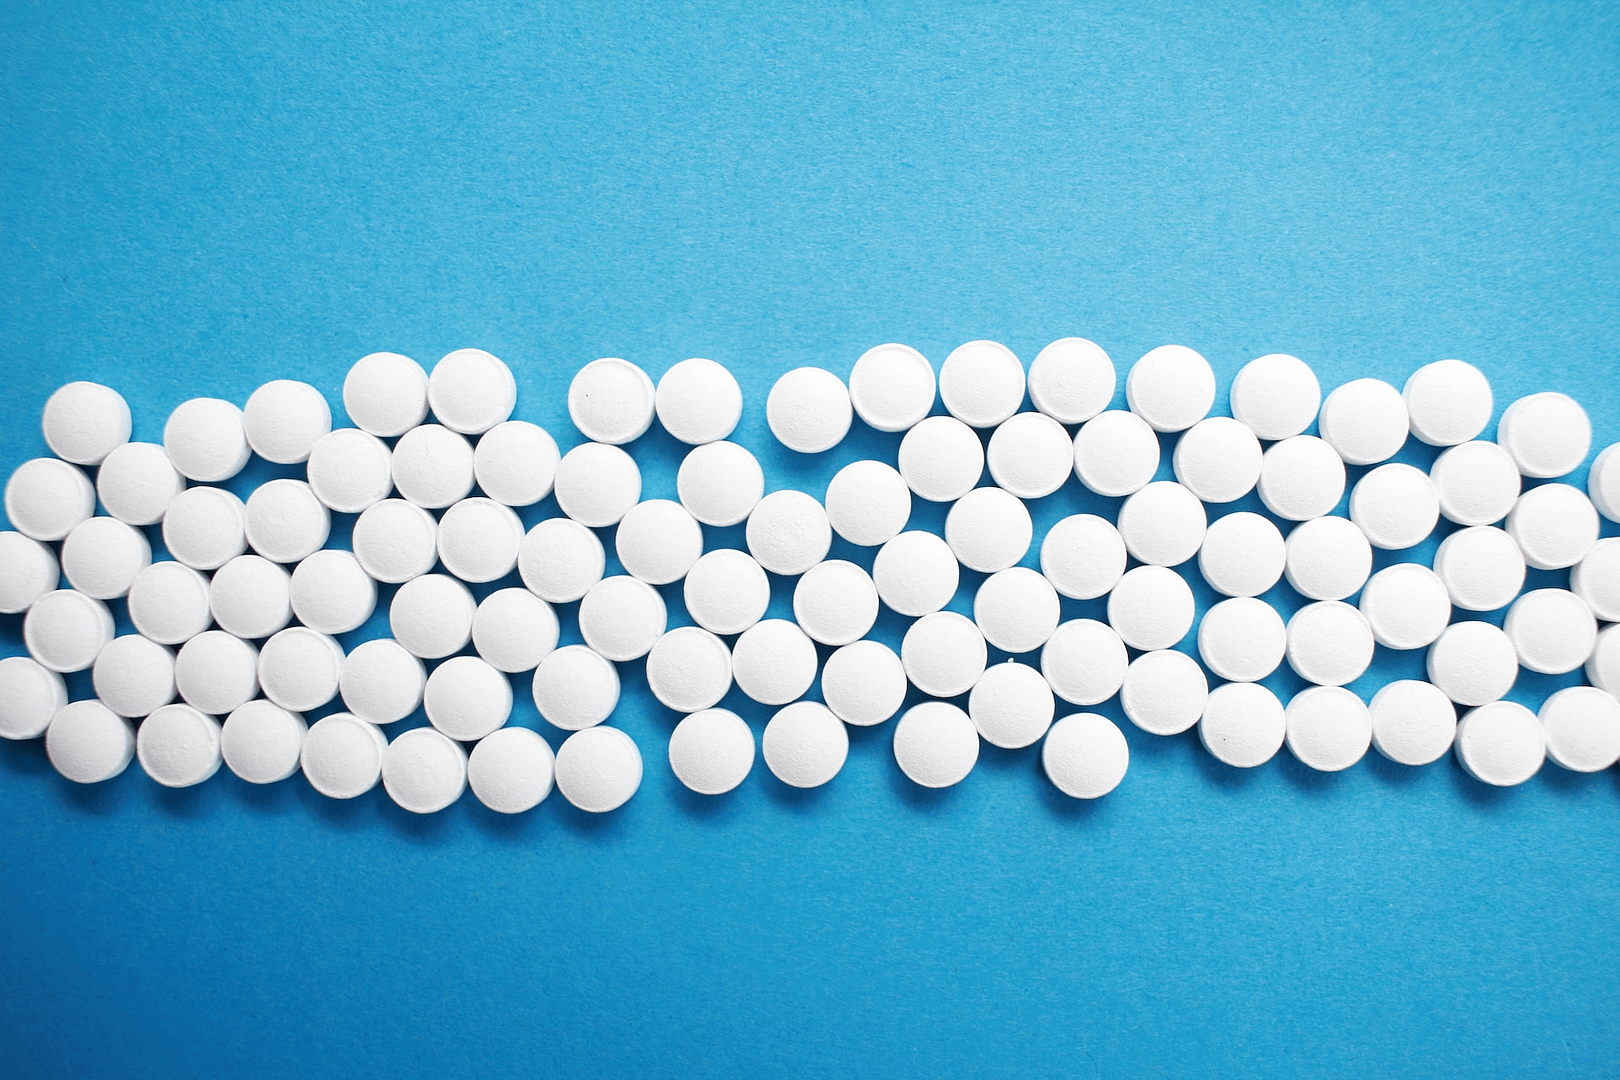 pills against a blue background